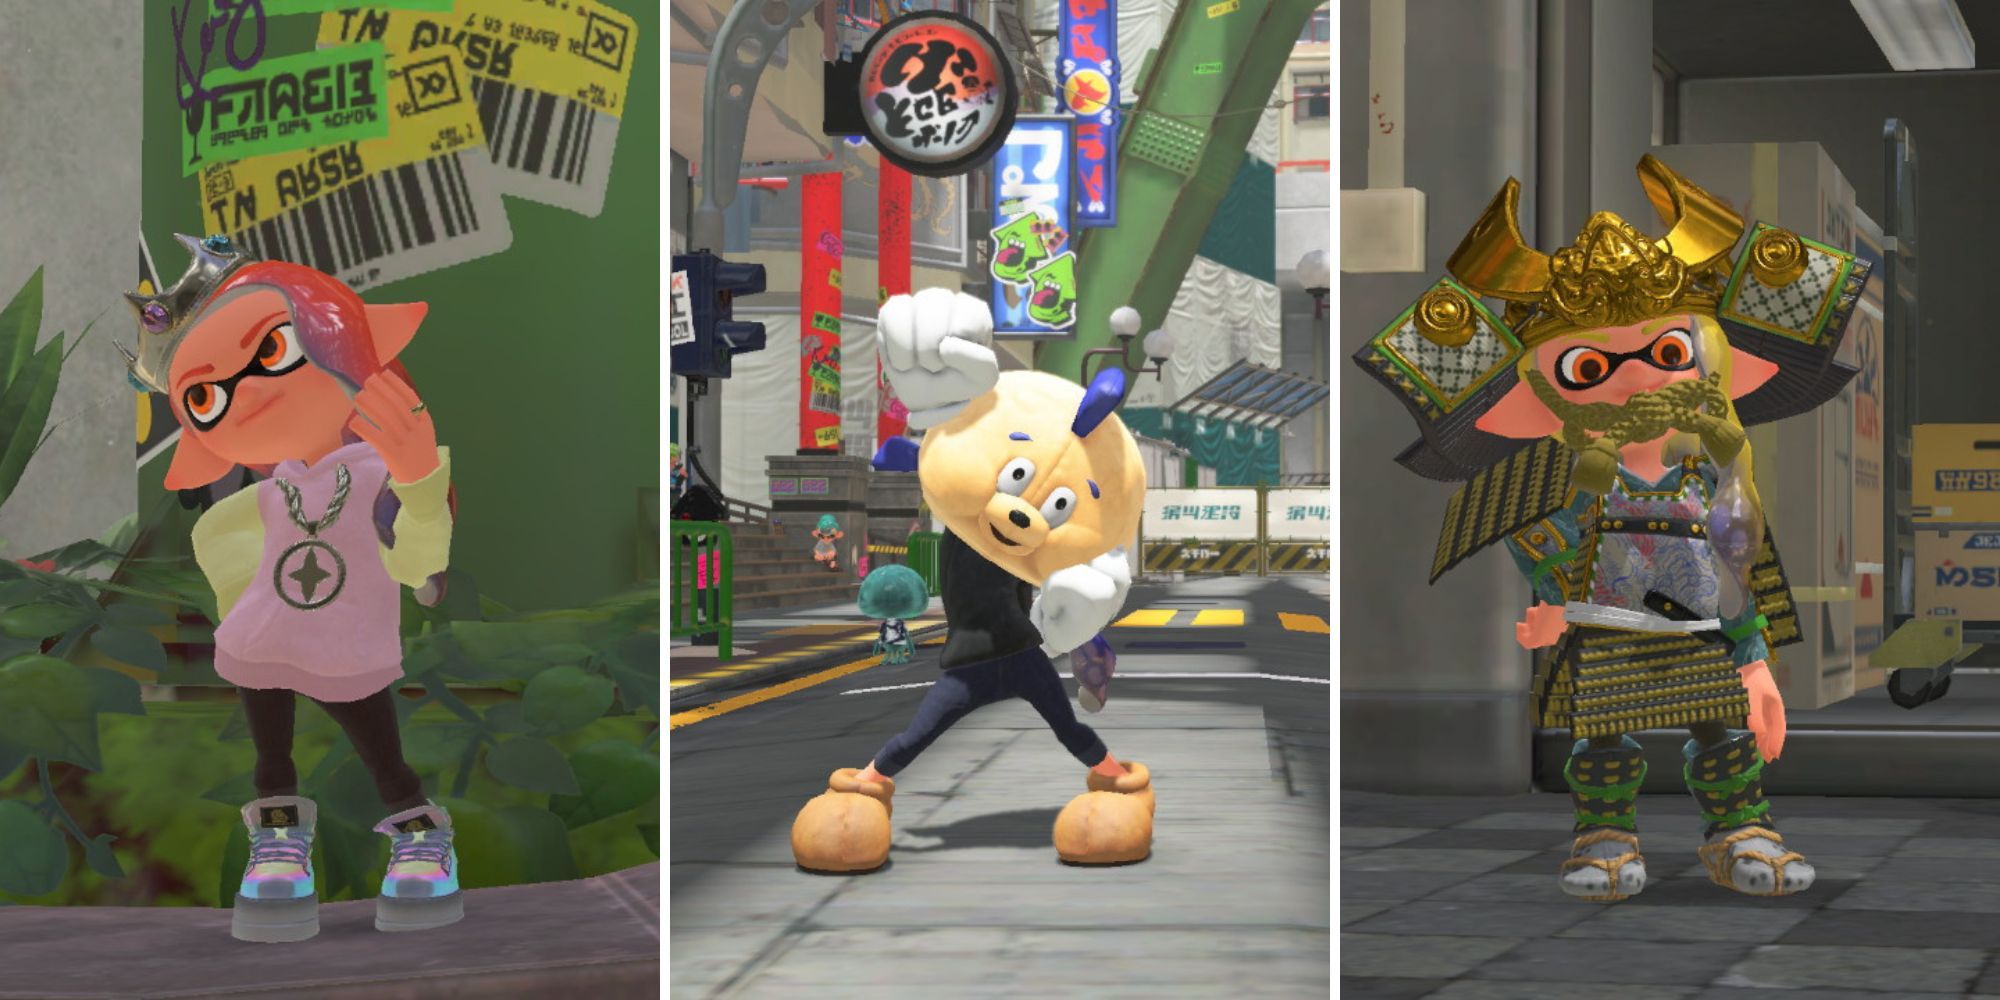 An Inkling stands by a pillar in the Pearlescent outfit, an Inkling stands on the sidewalk in the Fresh Fish outfit, An Inkling in the Samurai outfit 